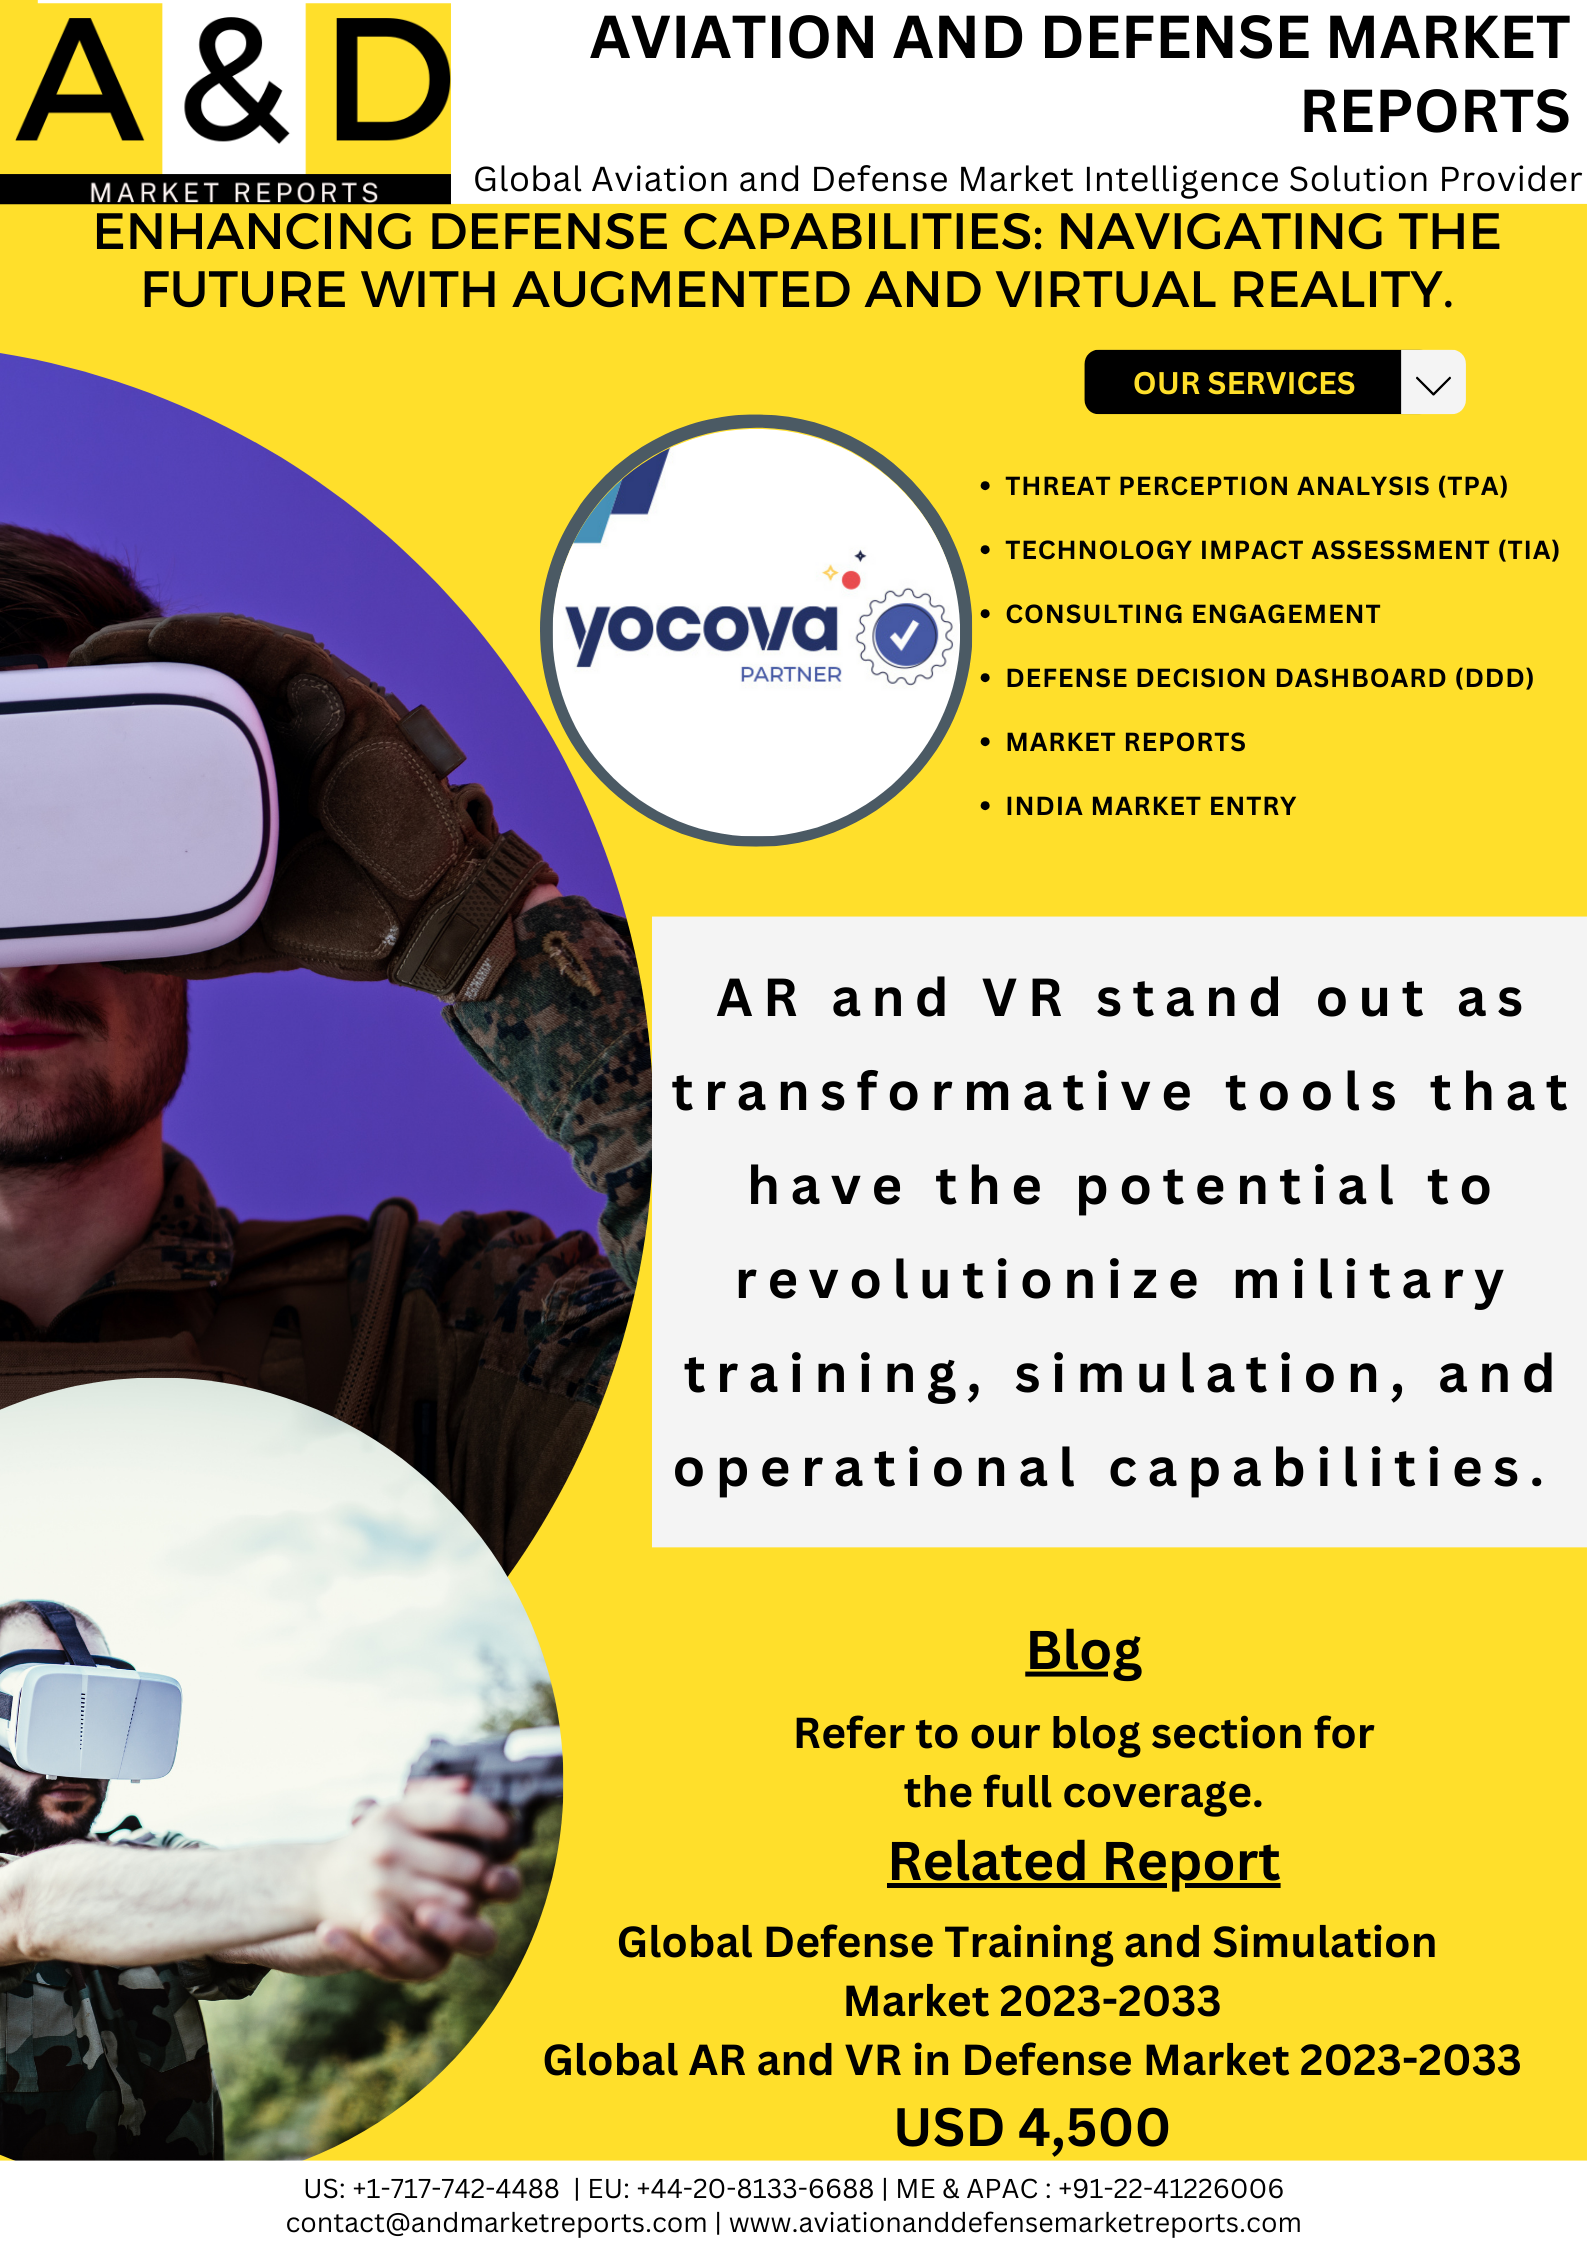 ENHANCING DEFENSE CAPABILITIES: NAVIGATING THE FUTURE WITH AUGMENTED AND VIRTUAL REALITY